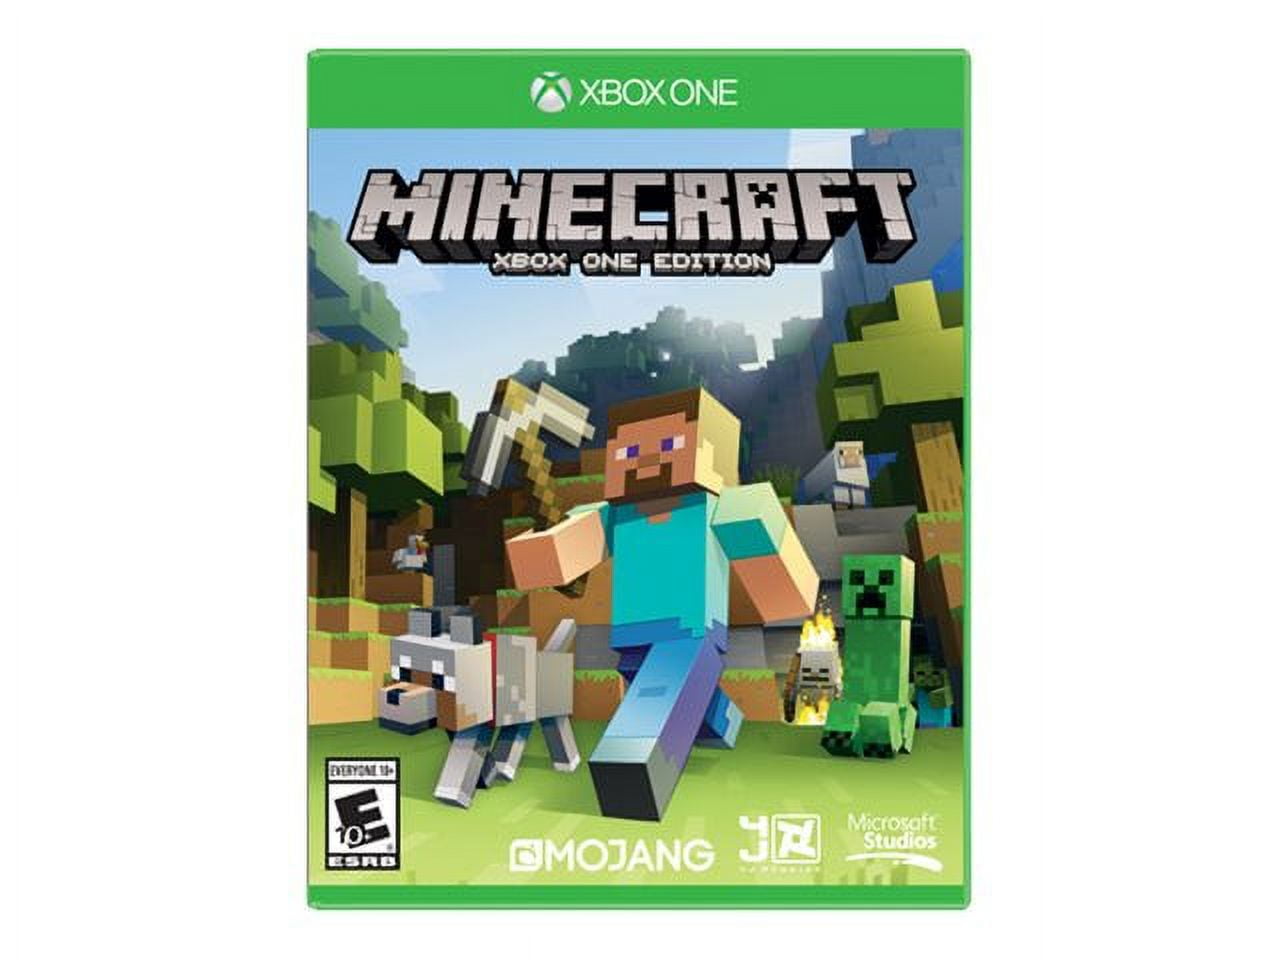 Microsoft-owned Minecraft no longer supported on Microsoft-owned